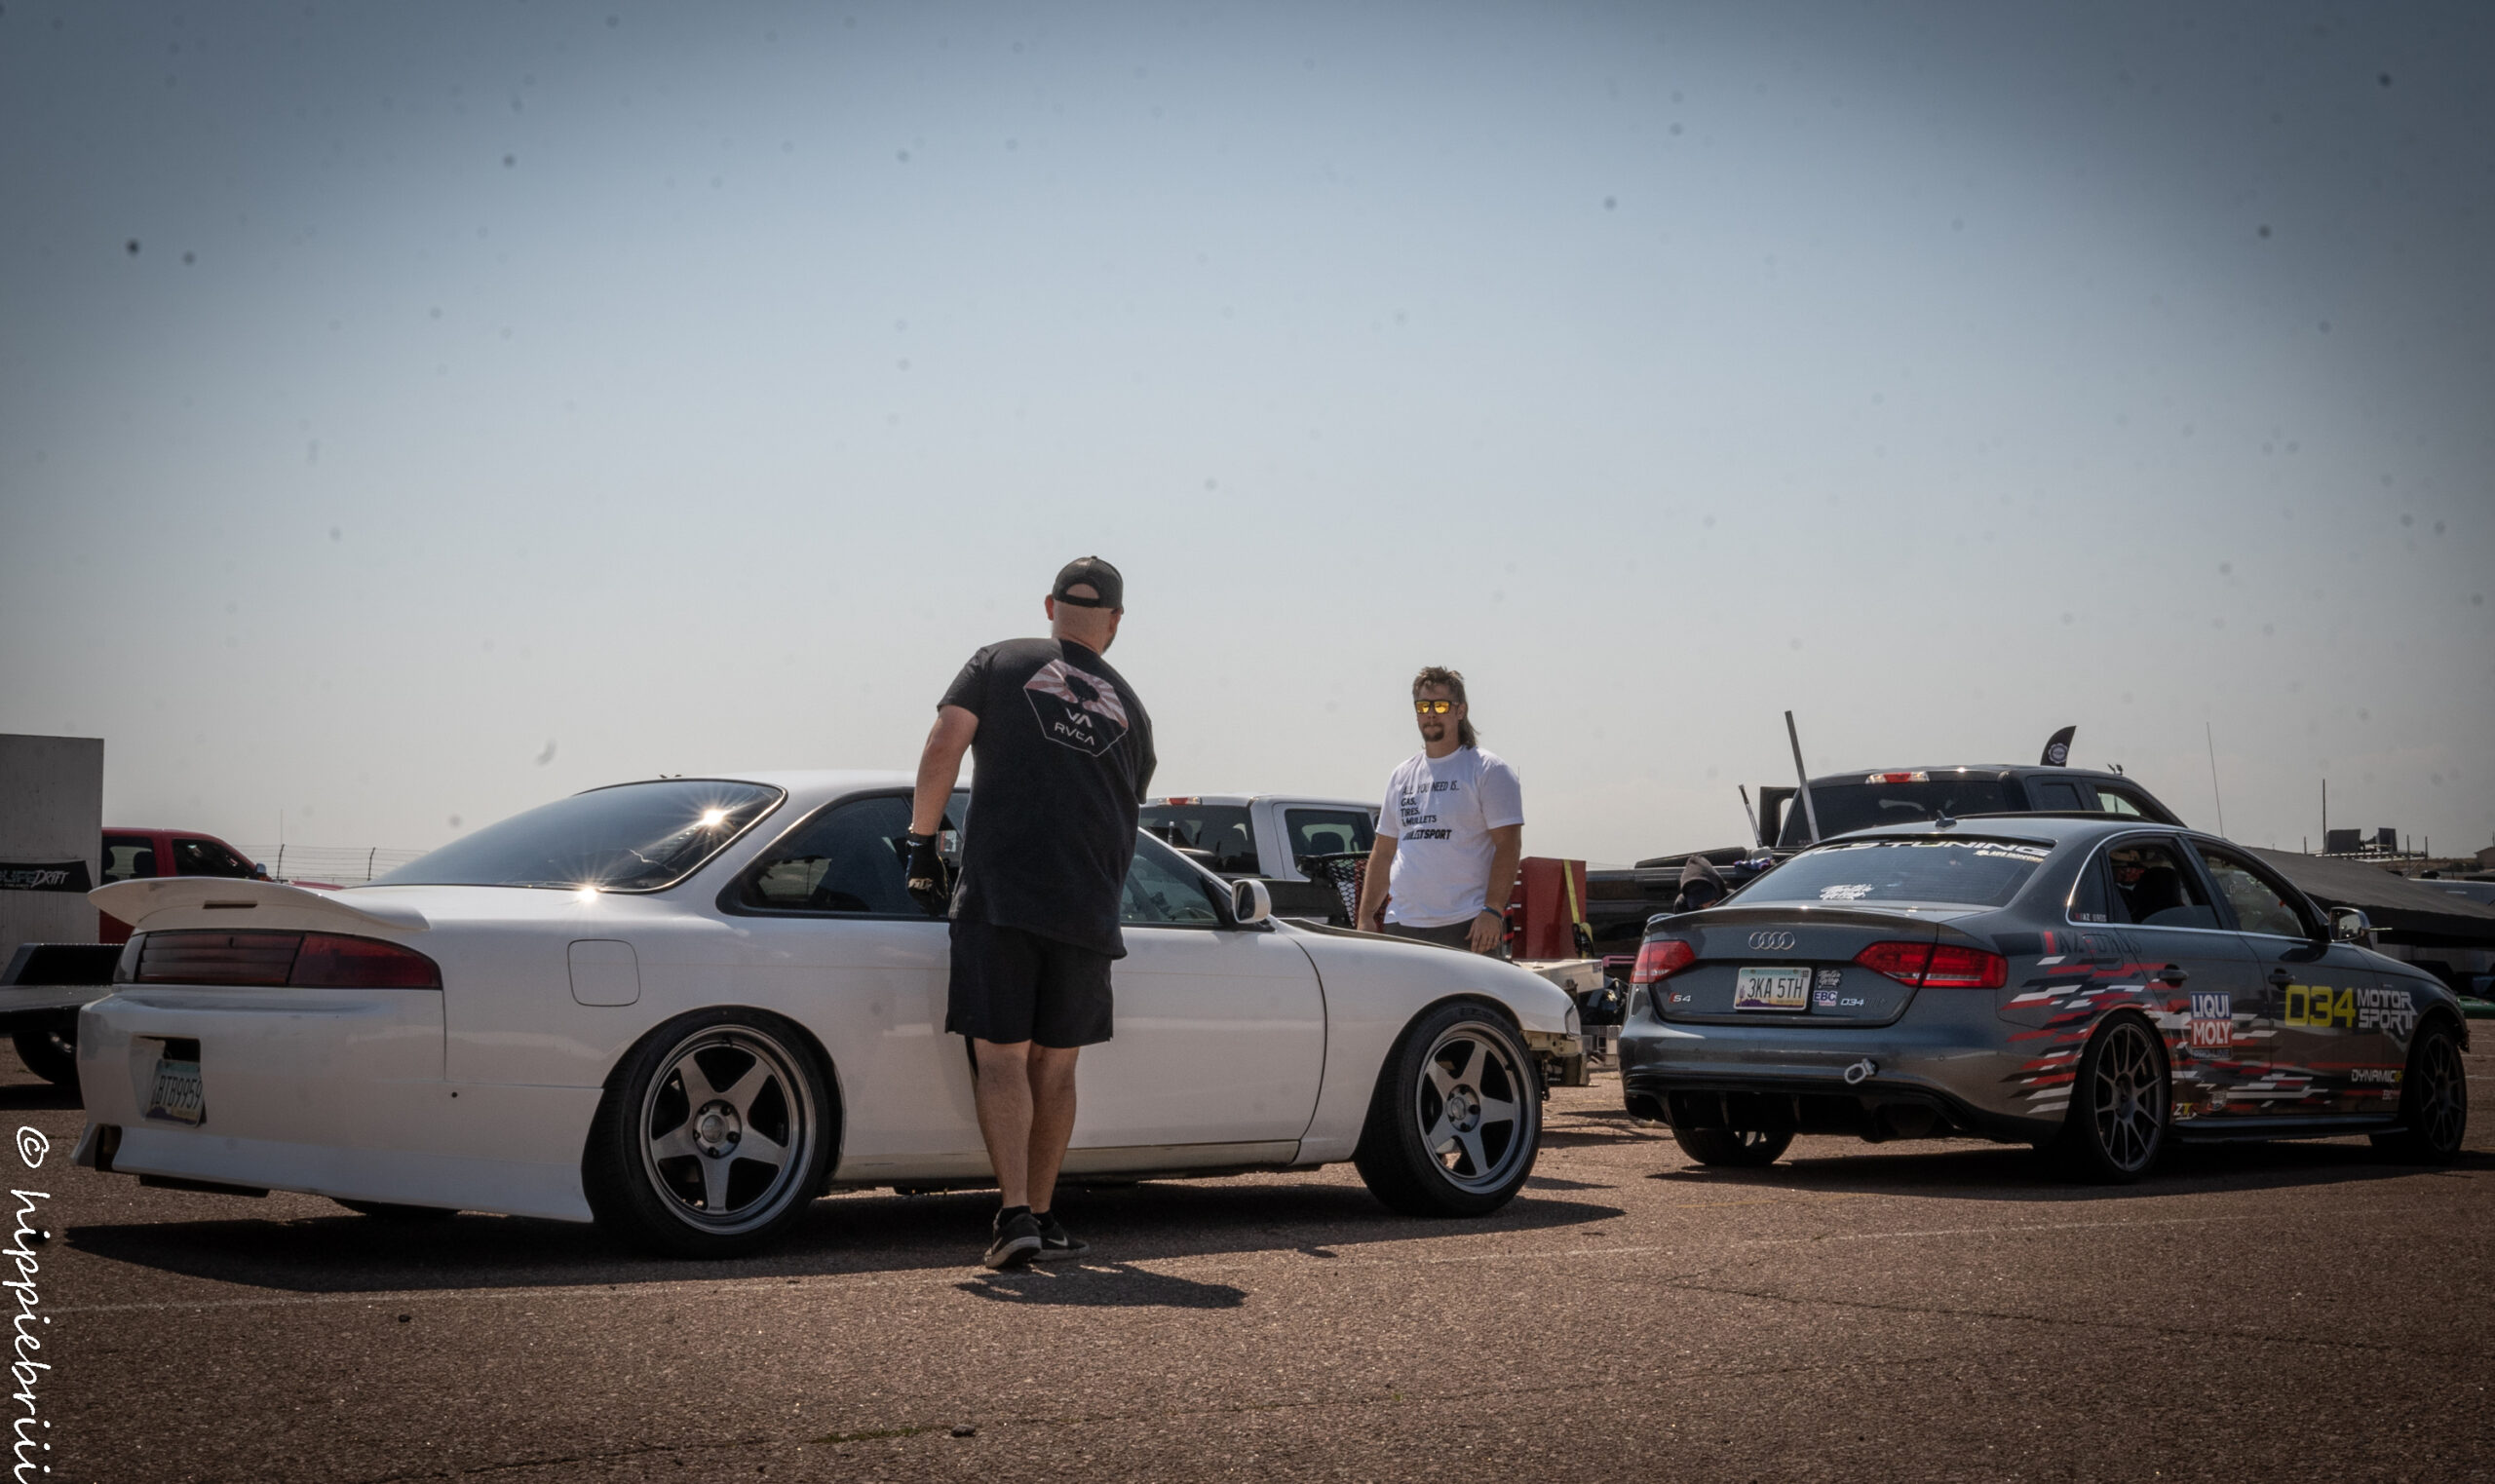 Colorado Drift Car Build  Understand Drifting Brakes - why this matters